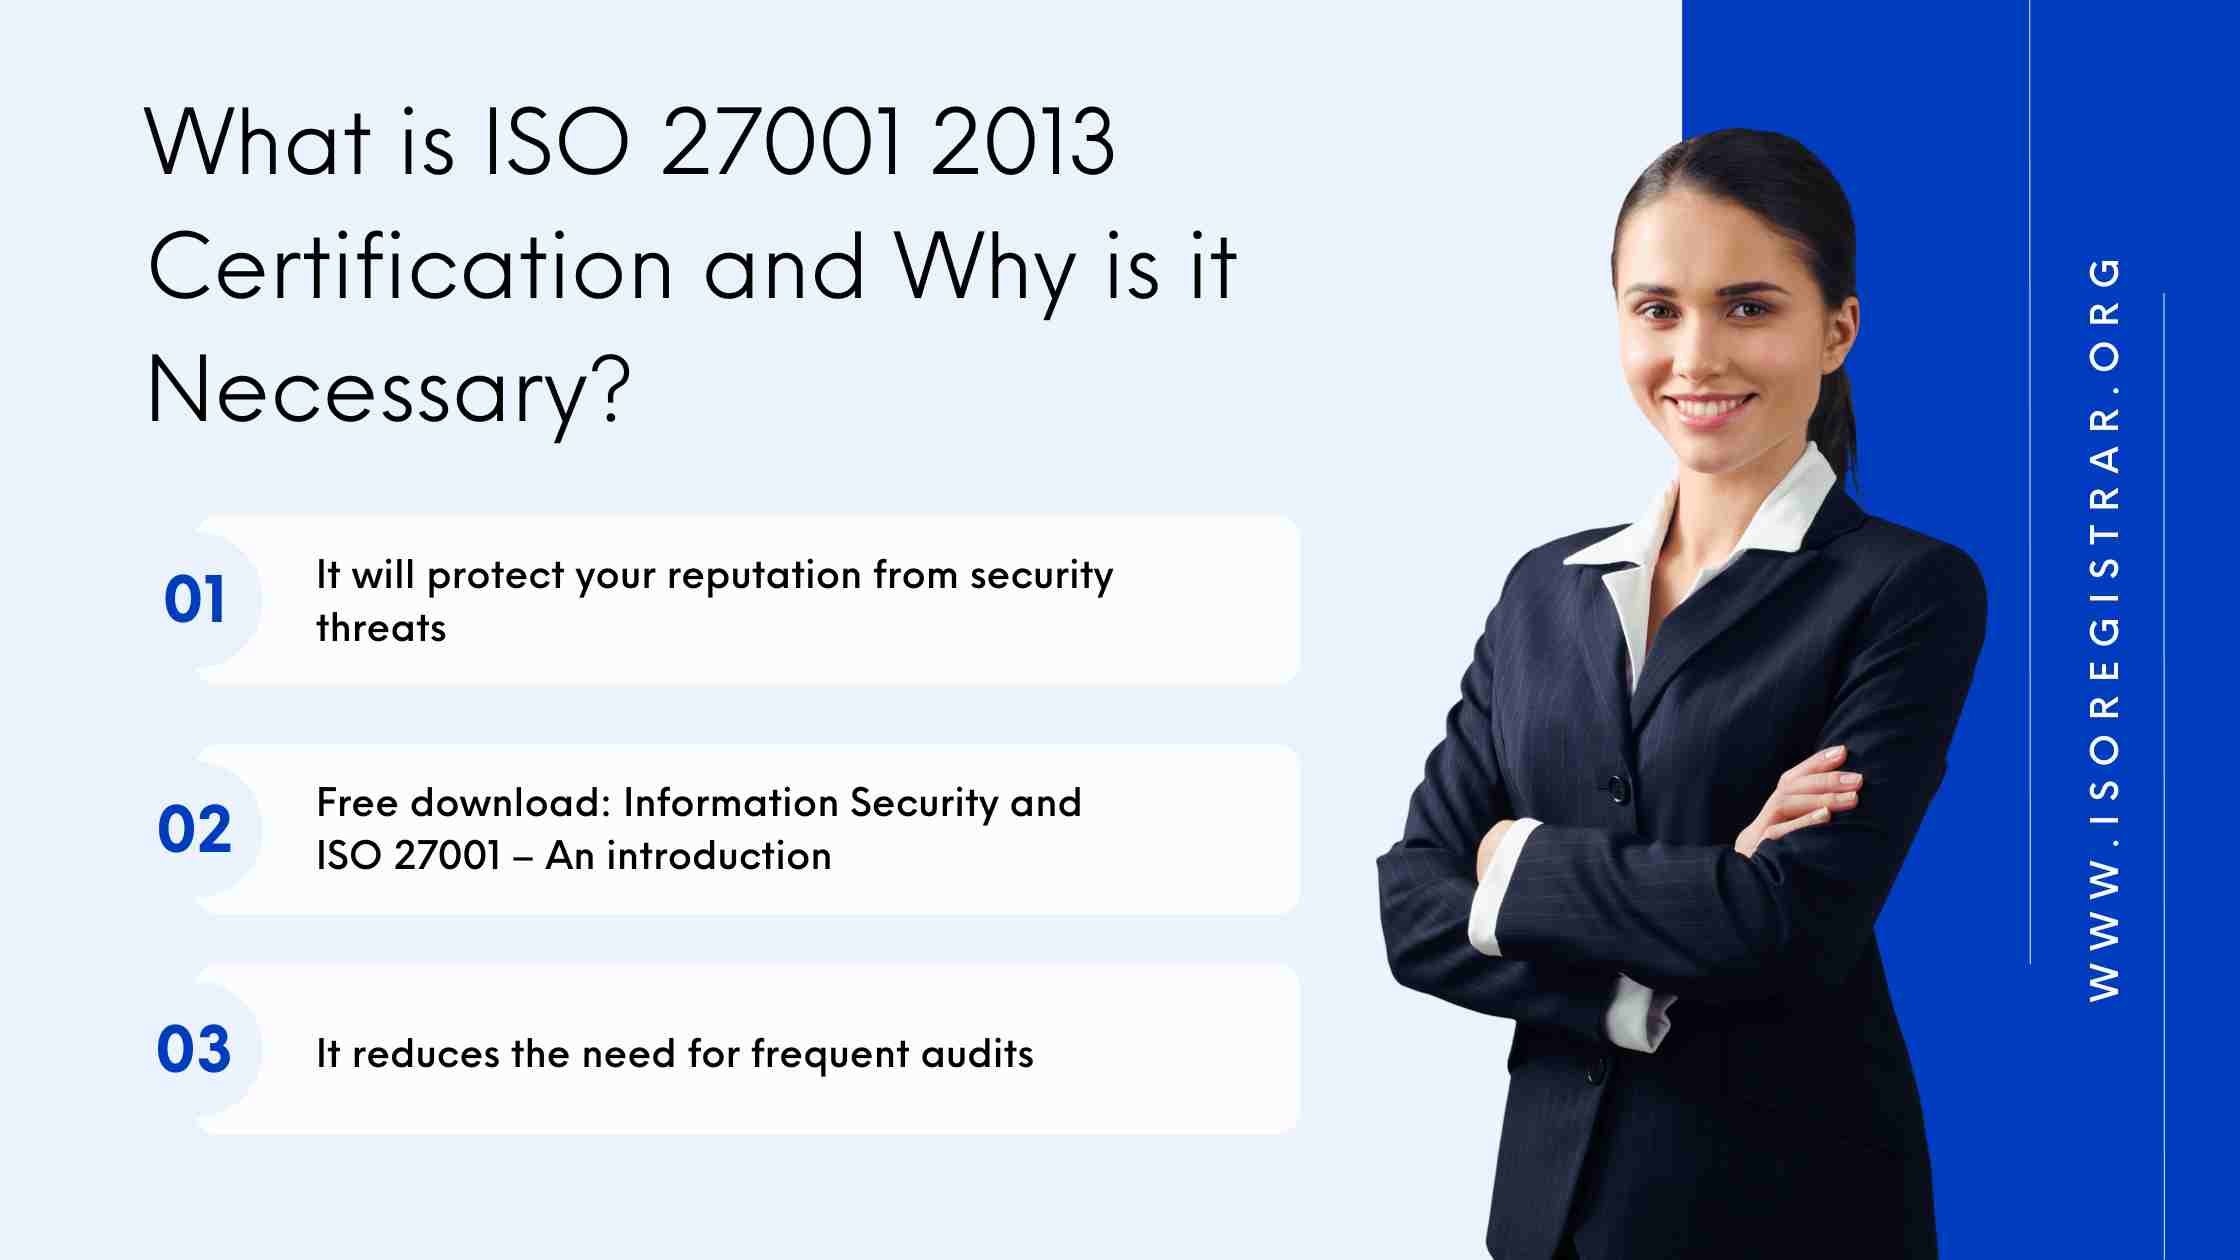 What is ISO 27001 2013 Certification and Why is it Necessary?